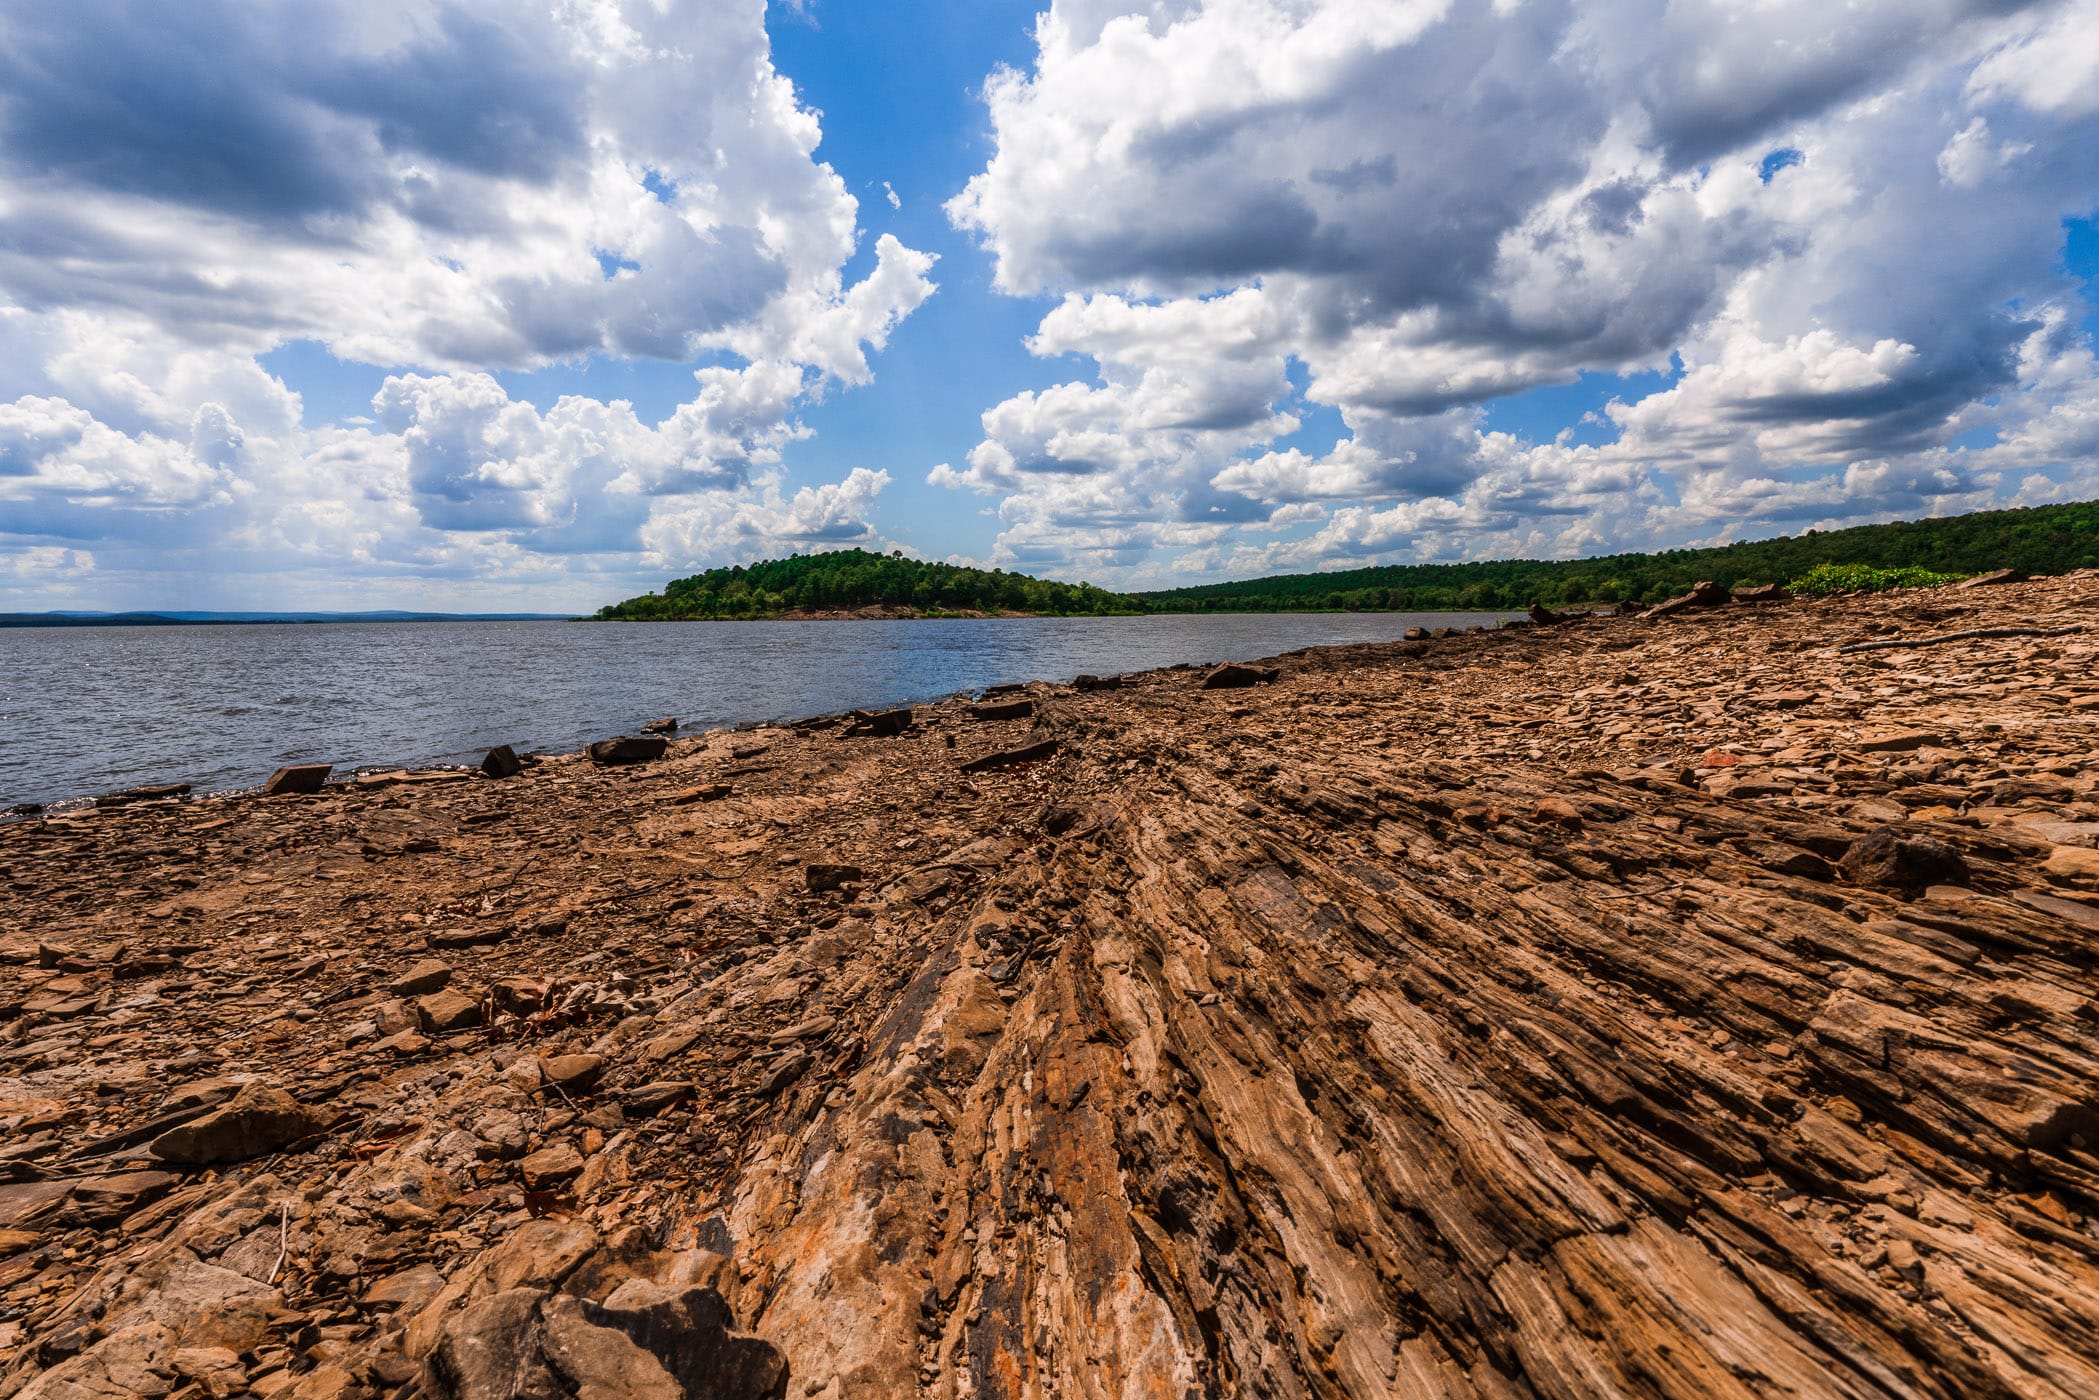 The rugged landscape of Oklahoma's Lake Wister State Park.